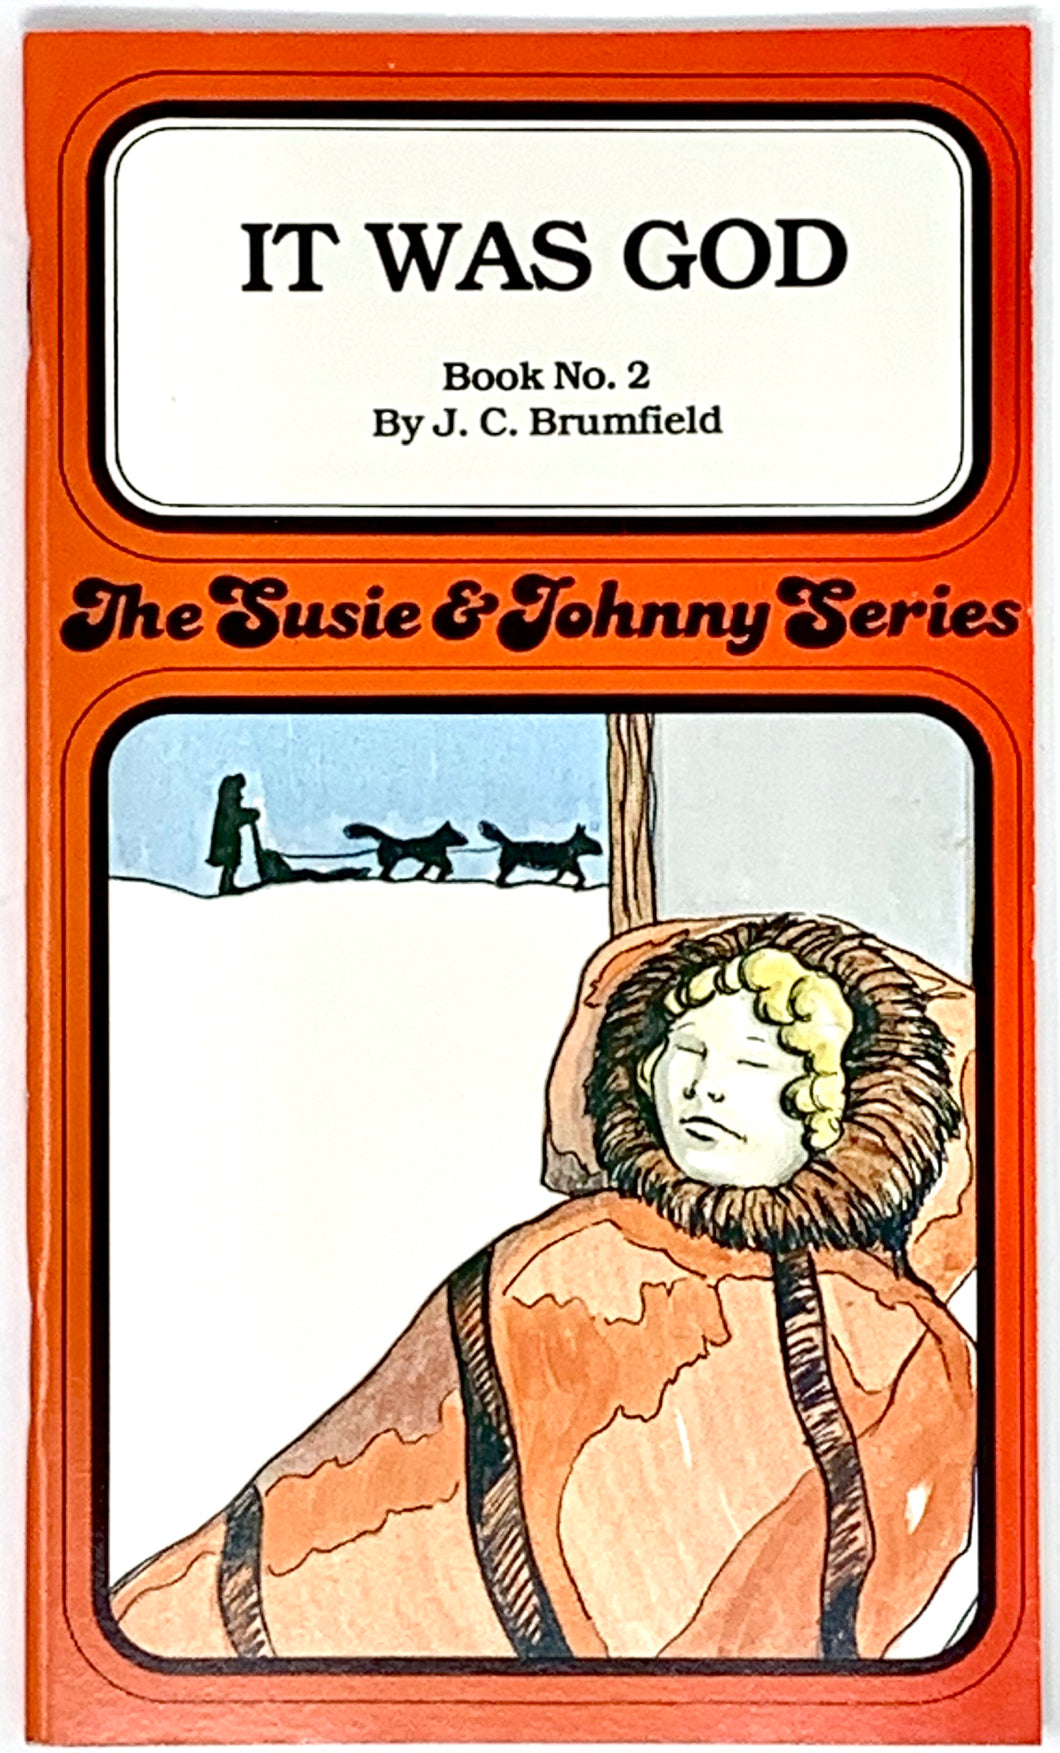 THE SUSIE & JOHNNY SERIES BOOK #2 